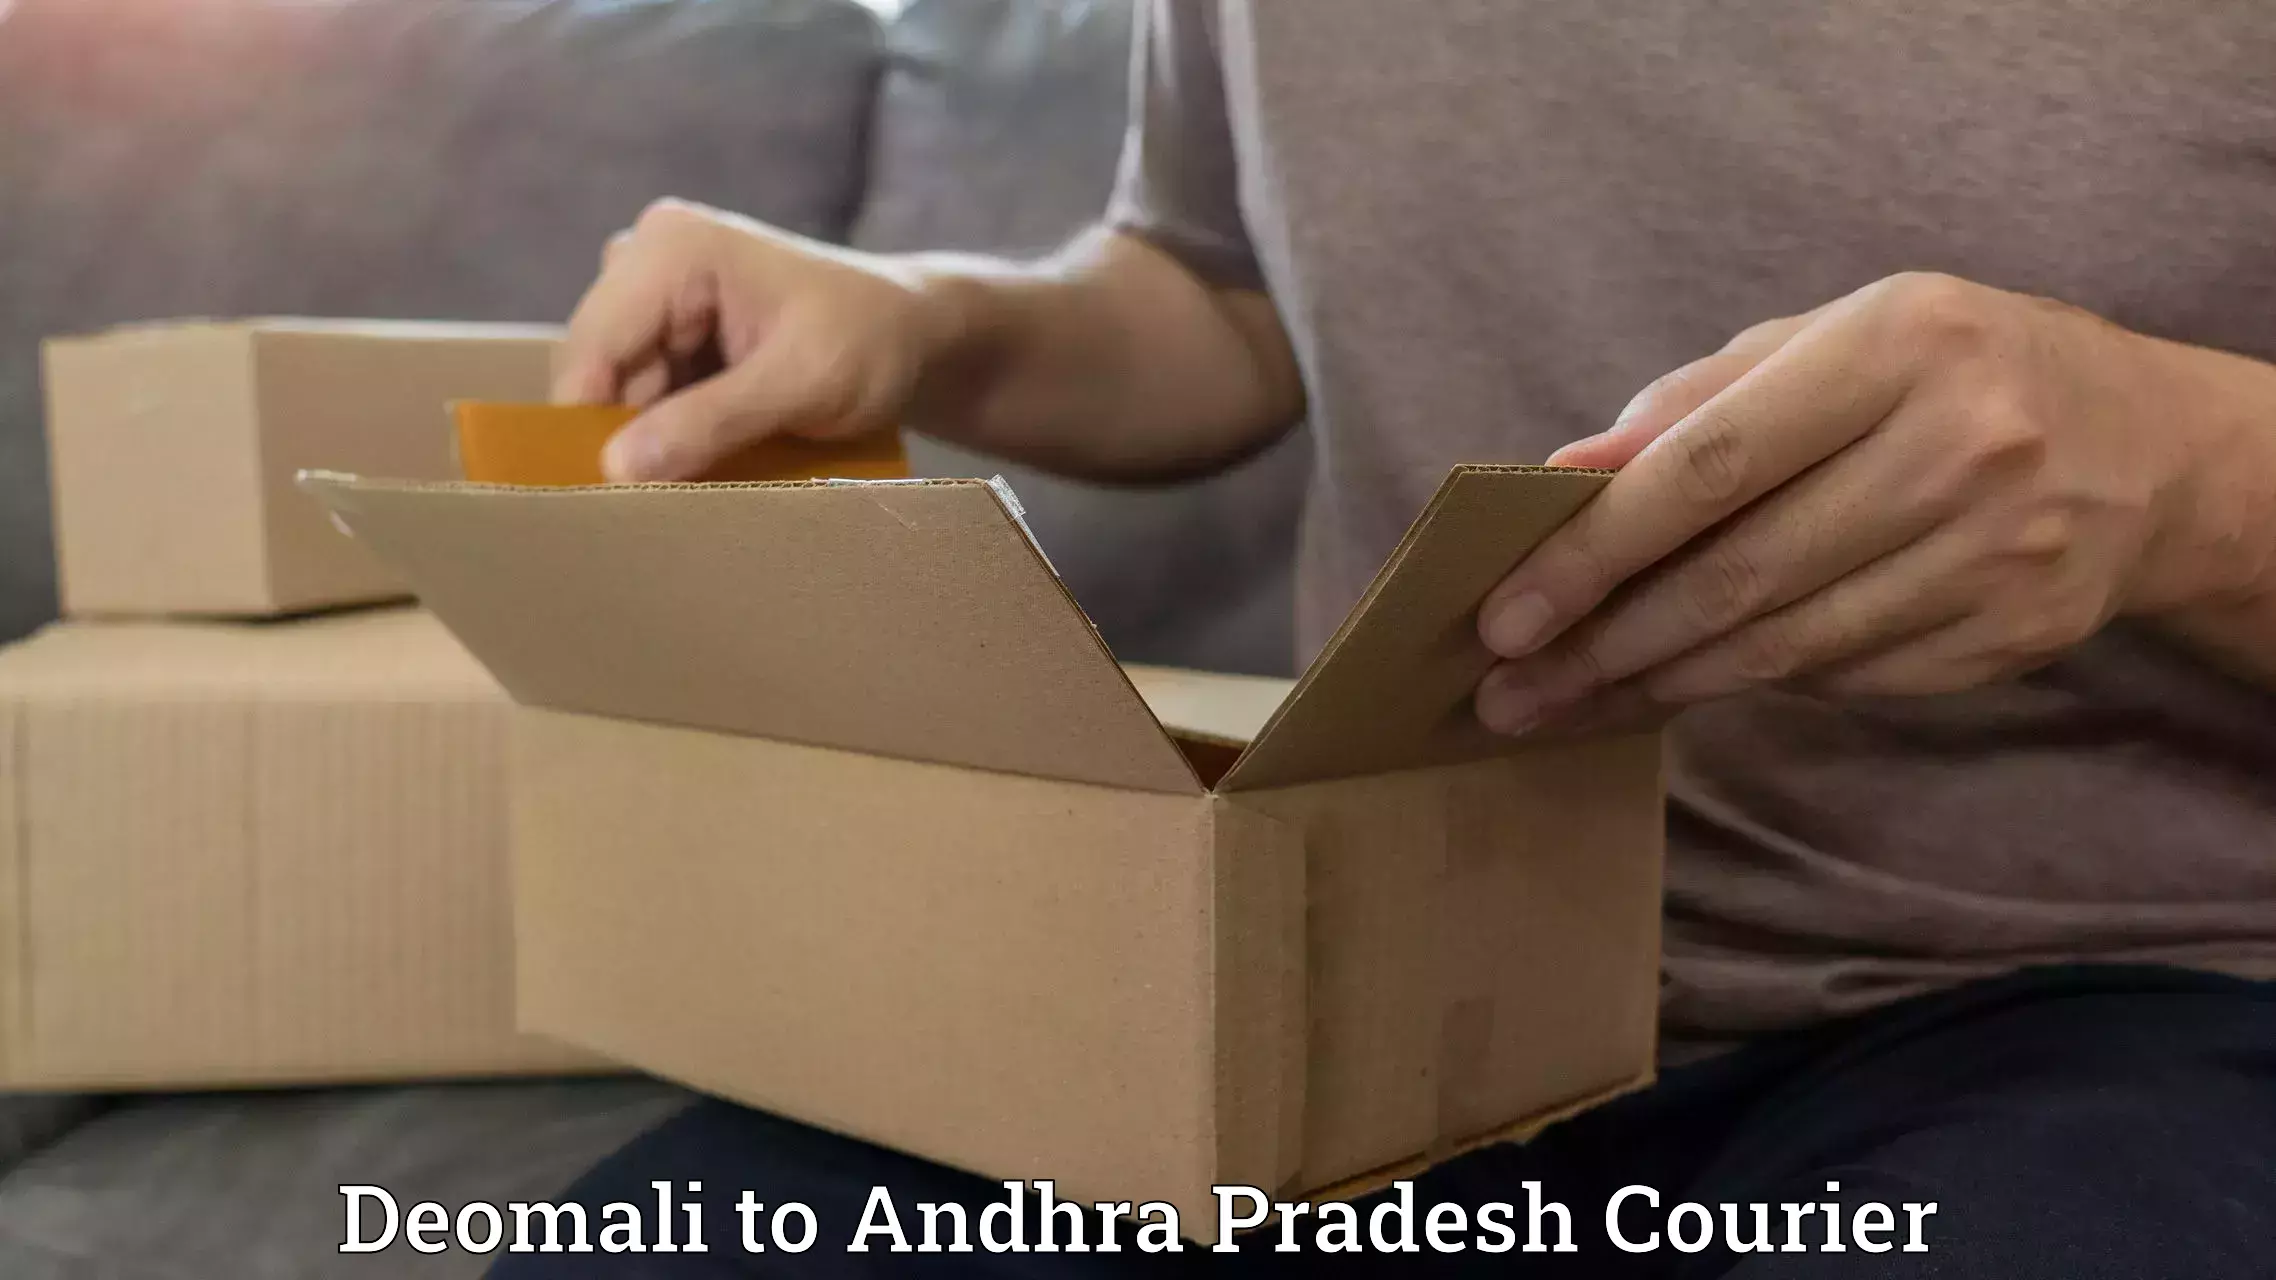 Domestic courier Deomali to Kathipudi